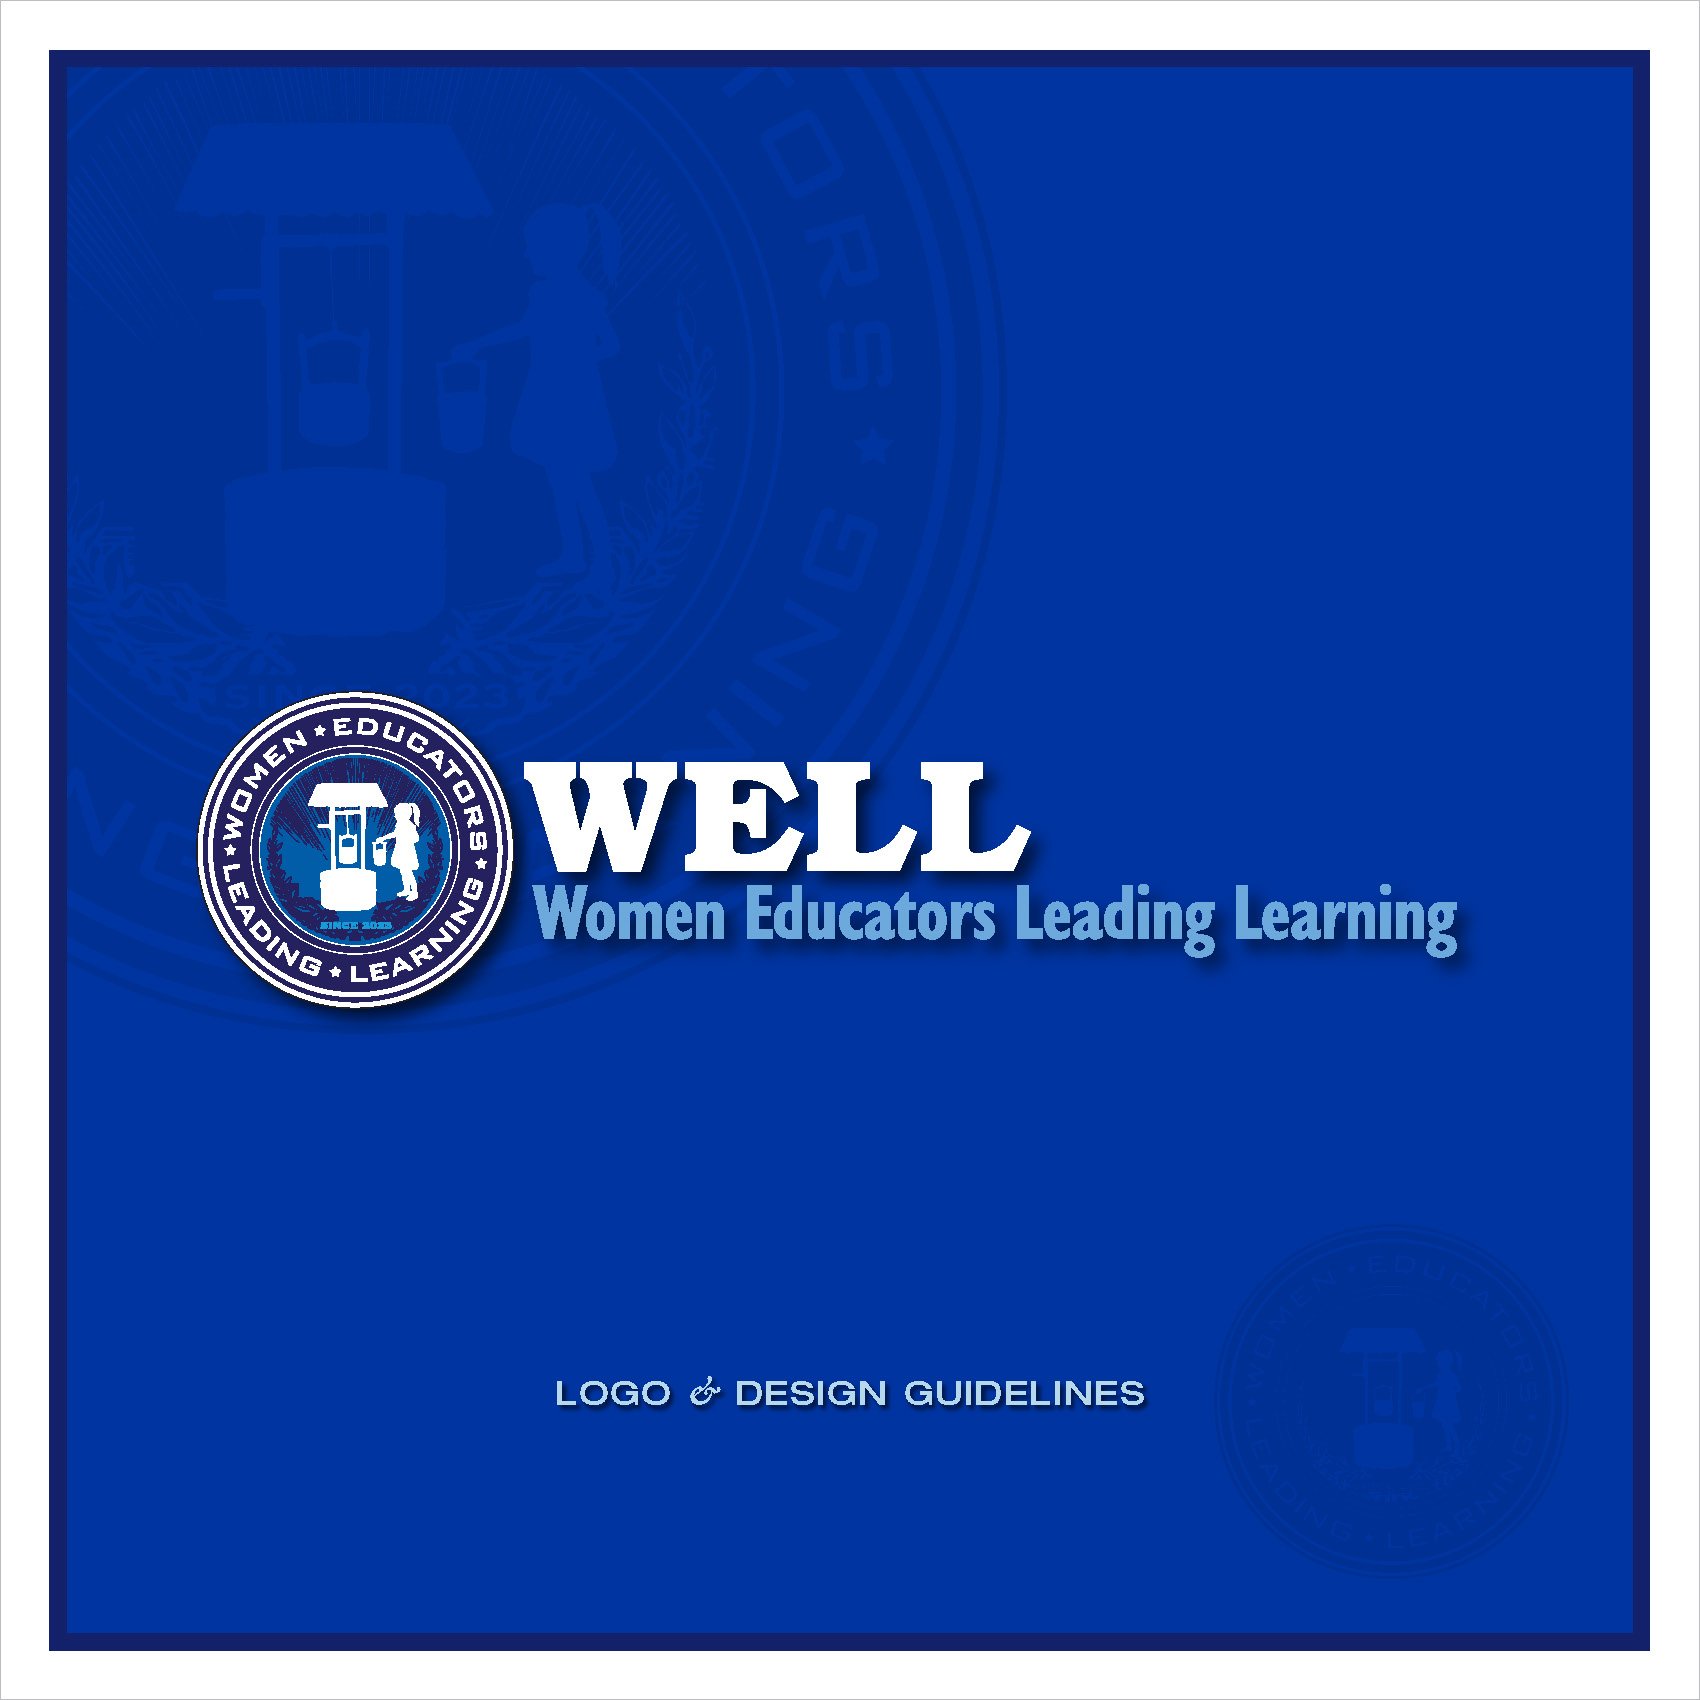 Logo and Visual ID Guidebook - Online -- designed and illustrated by SP STUDIOS, for WELL - Women Educators Leading Learning, New England.